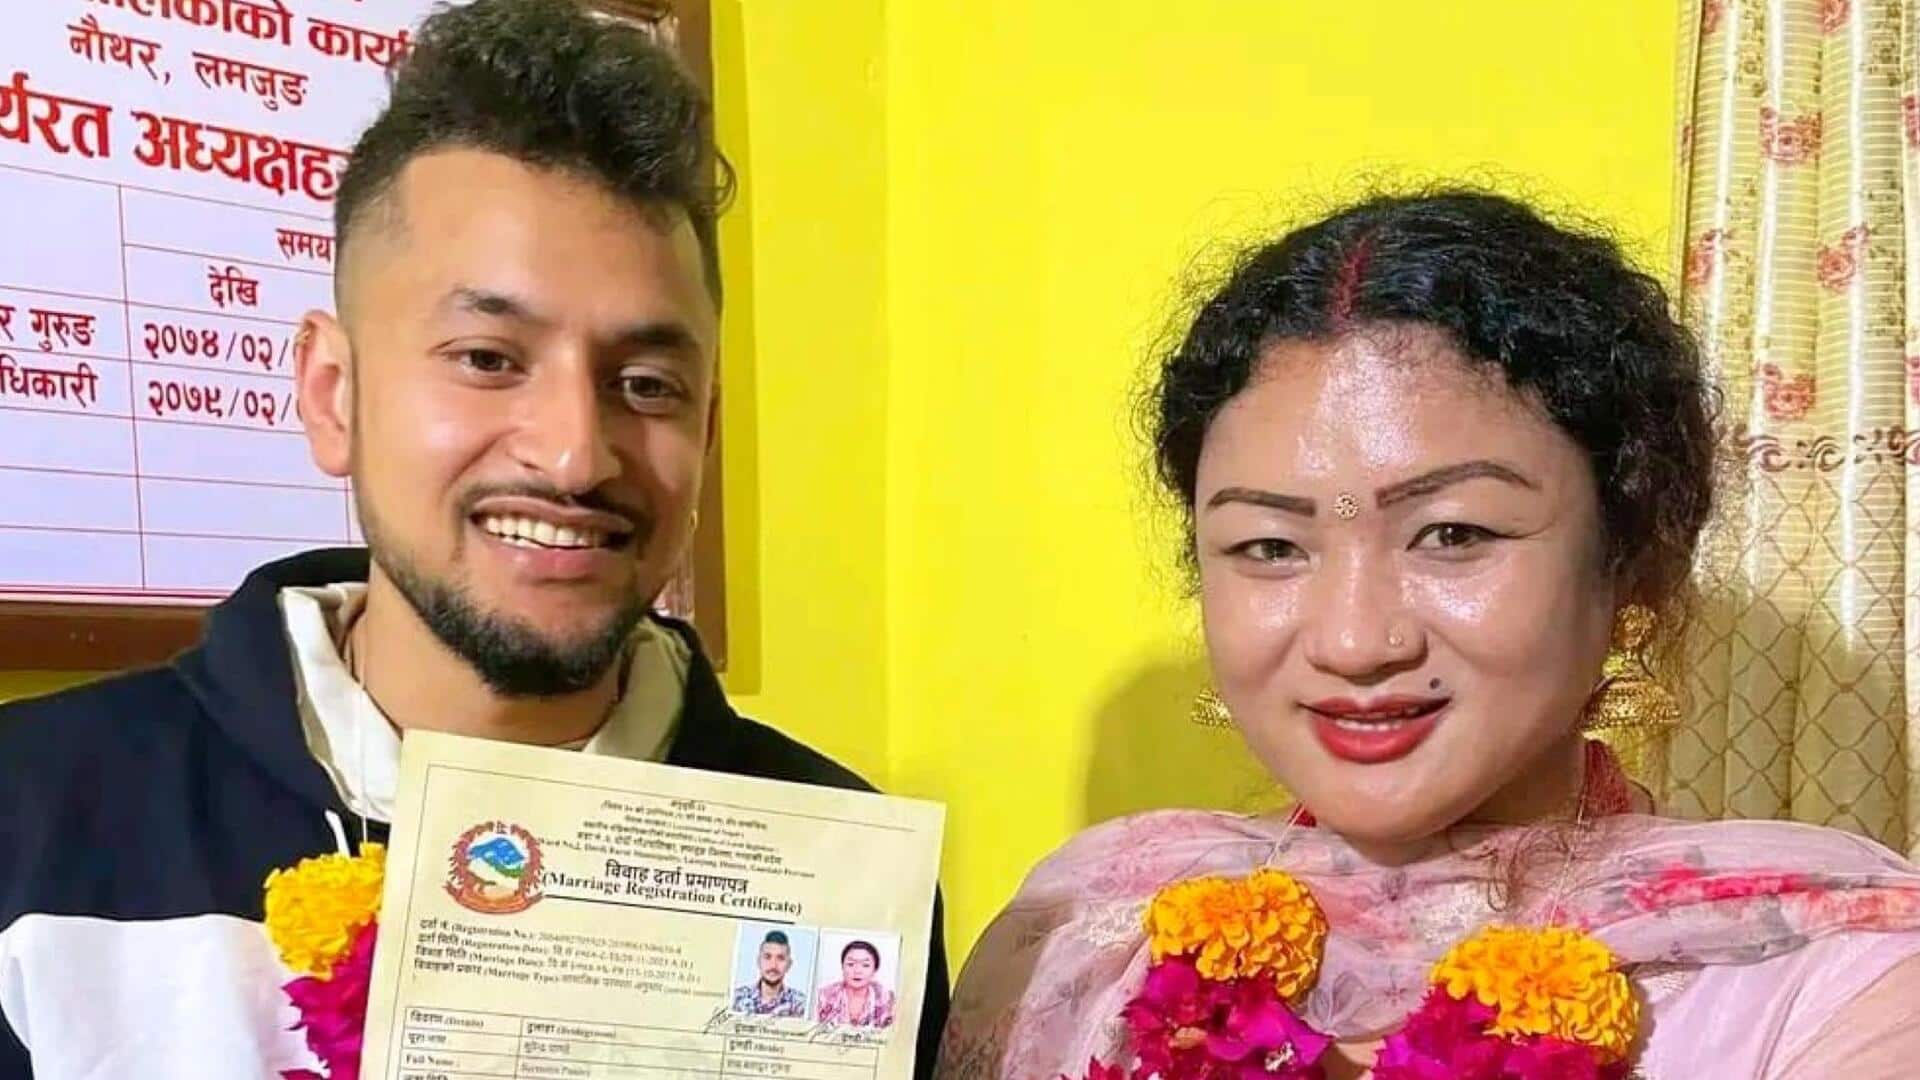 Nepal becomes first Asian country to register queer marriages